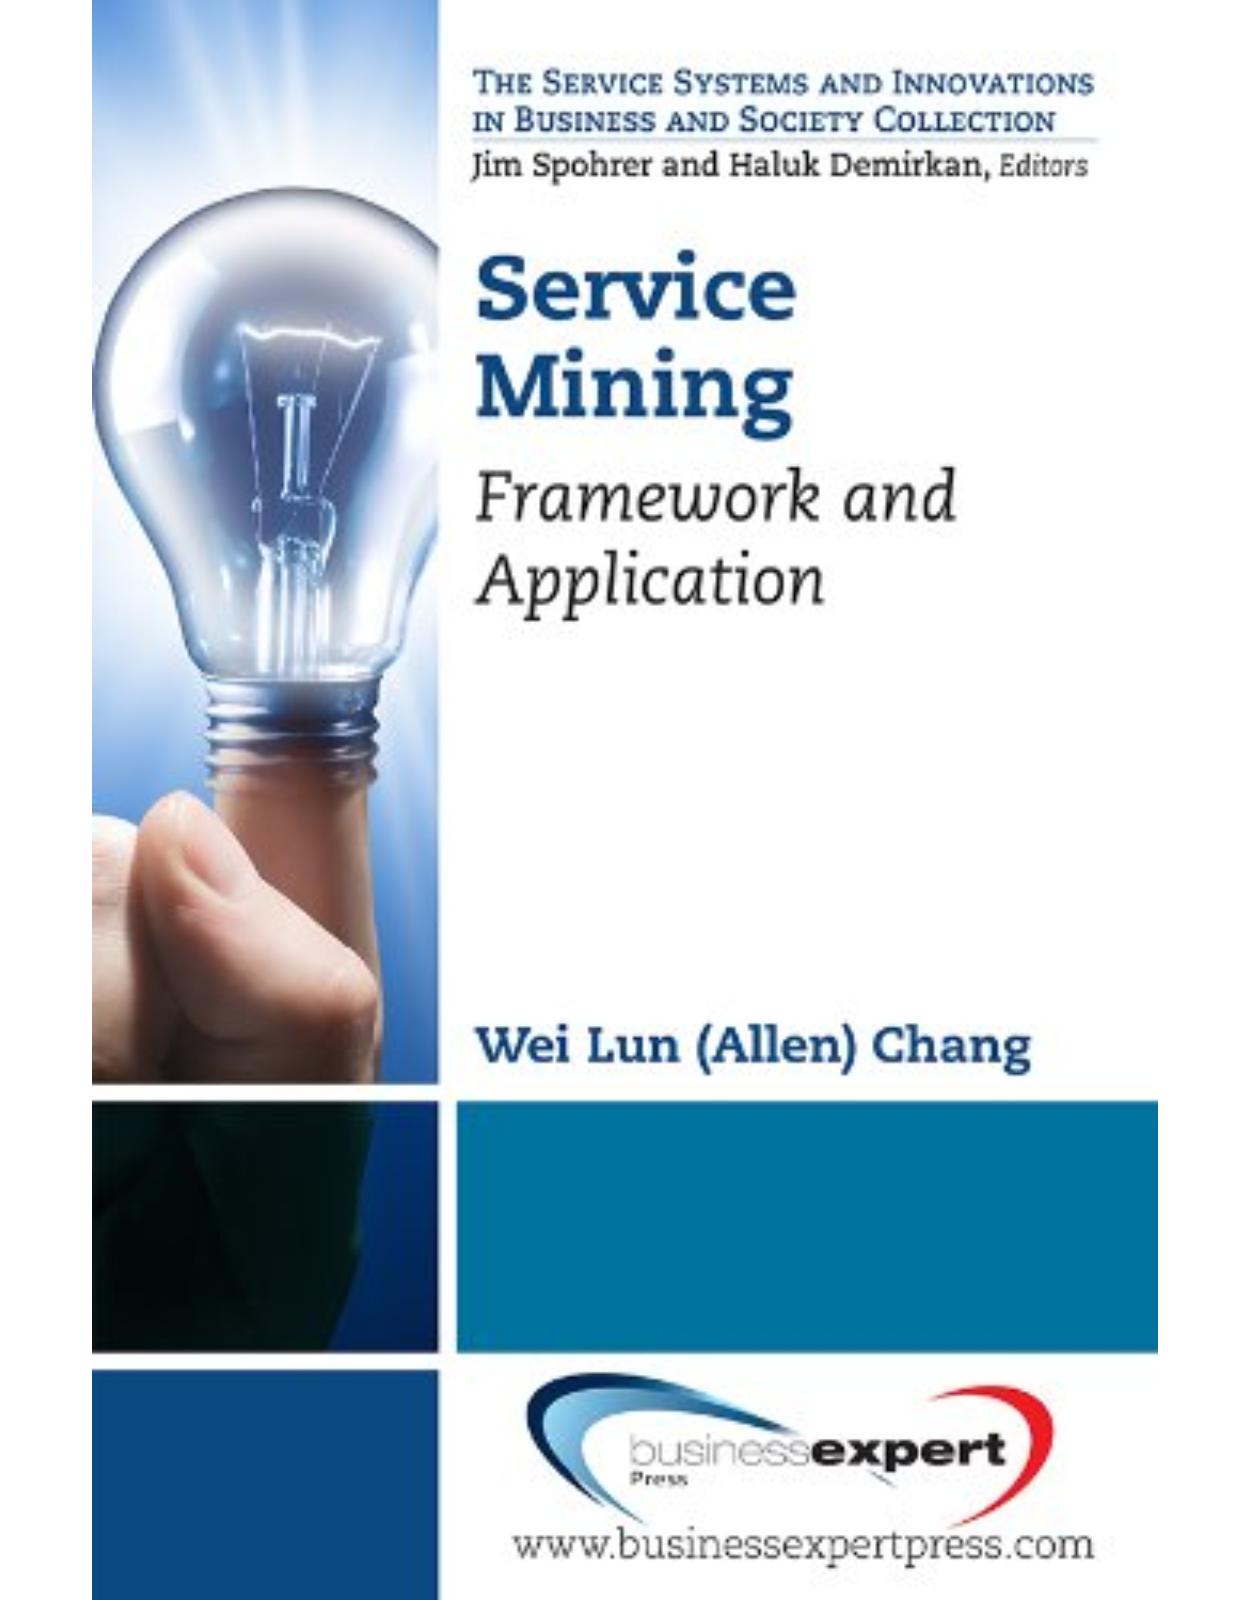 Service Mining: Framework and Application (Service Systems and Innovations in Business and Society)